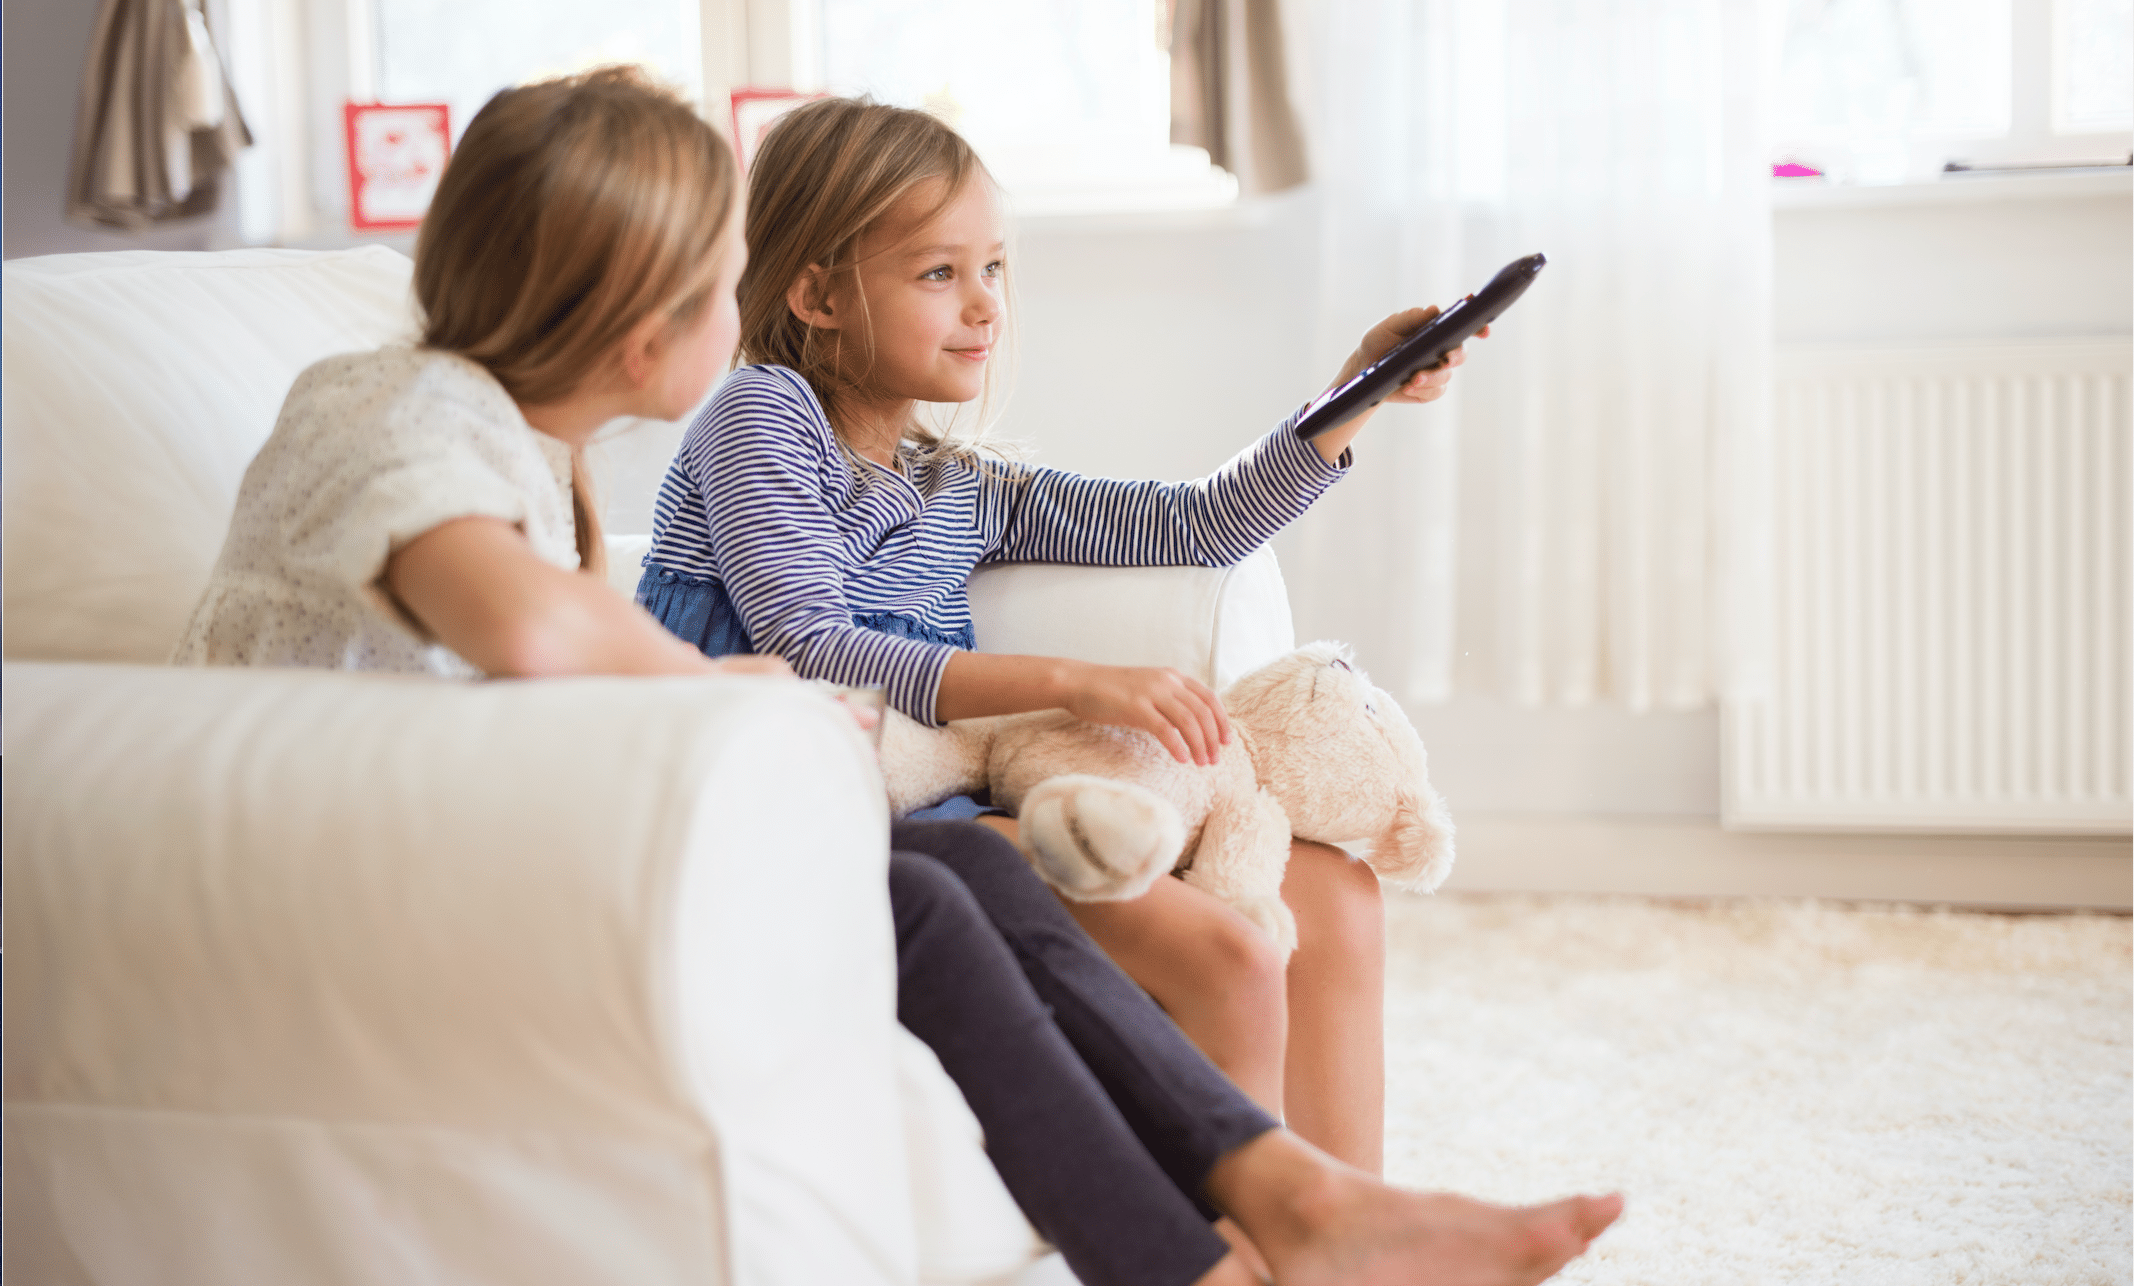 Screen Time: Why Screens Harm Your Child: 5 Steps to Get Your Kid Off Tablets, Phones & TV